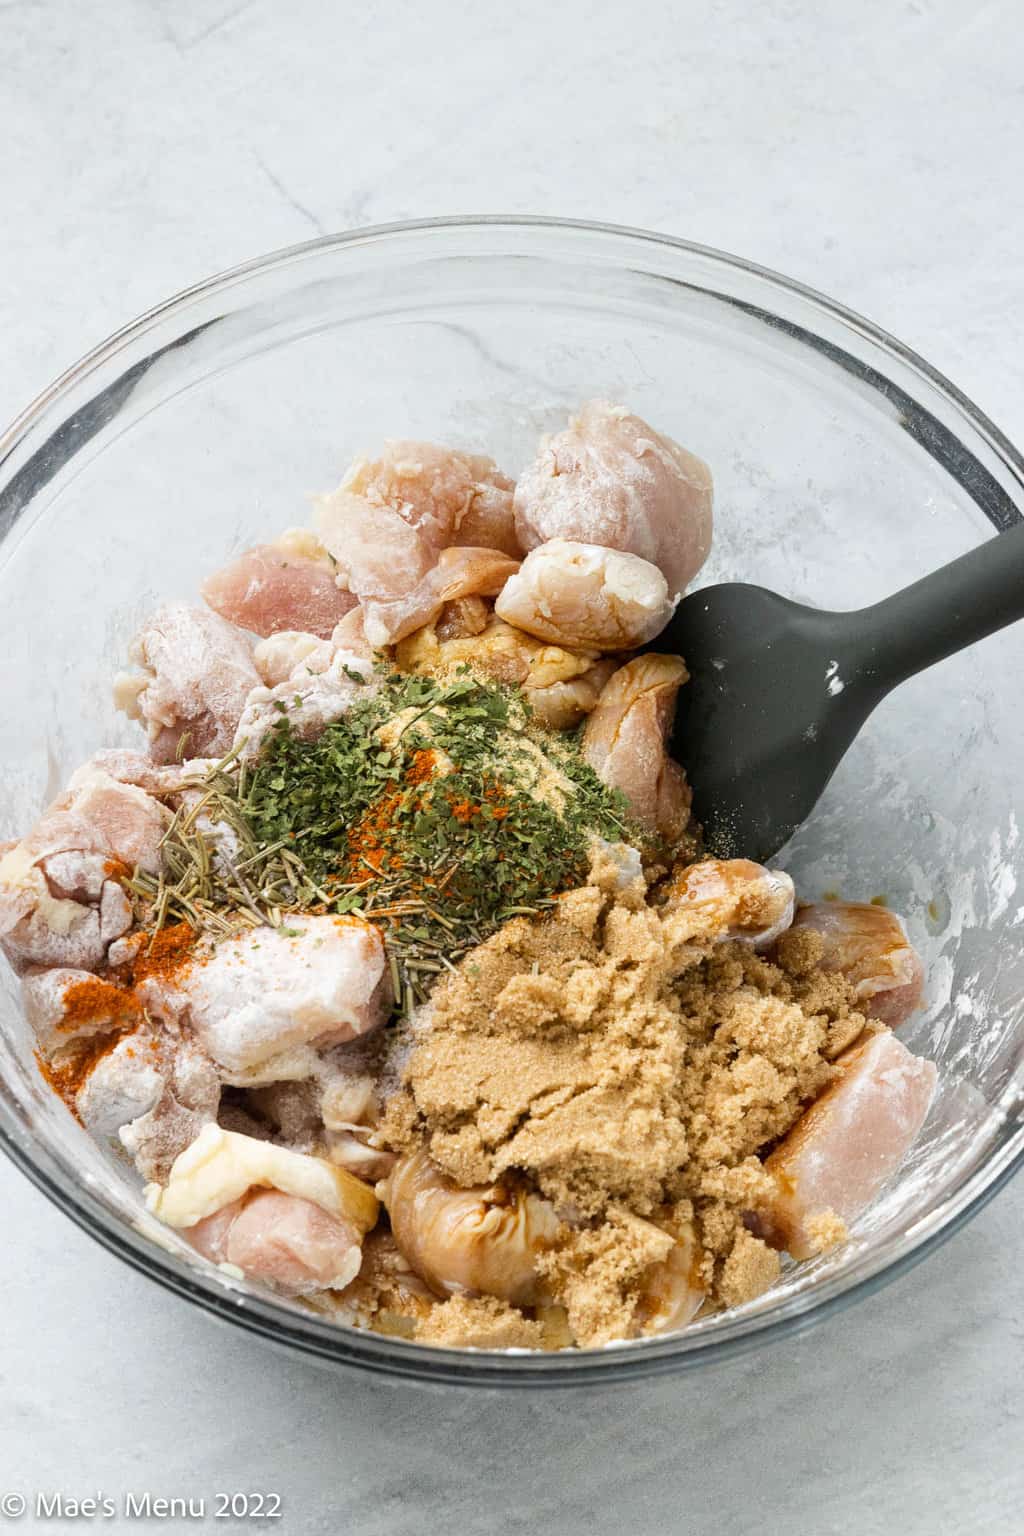 A clear mixing bowl of chicken with brown sugar, salt, dried herbs, and other seasonings.